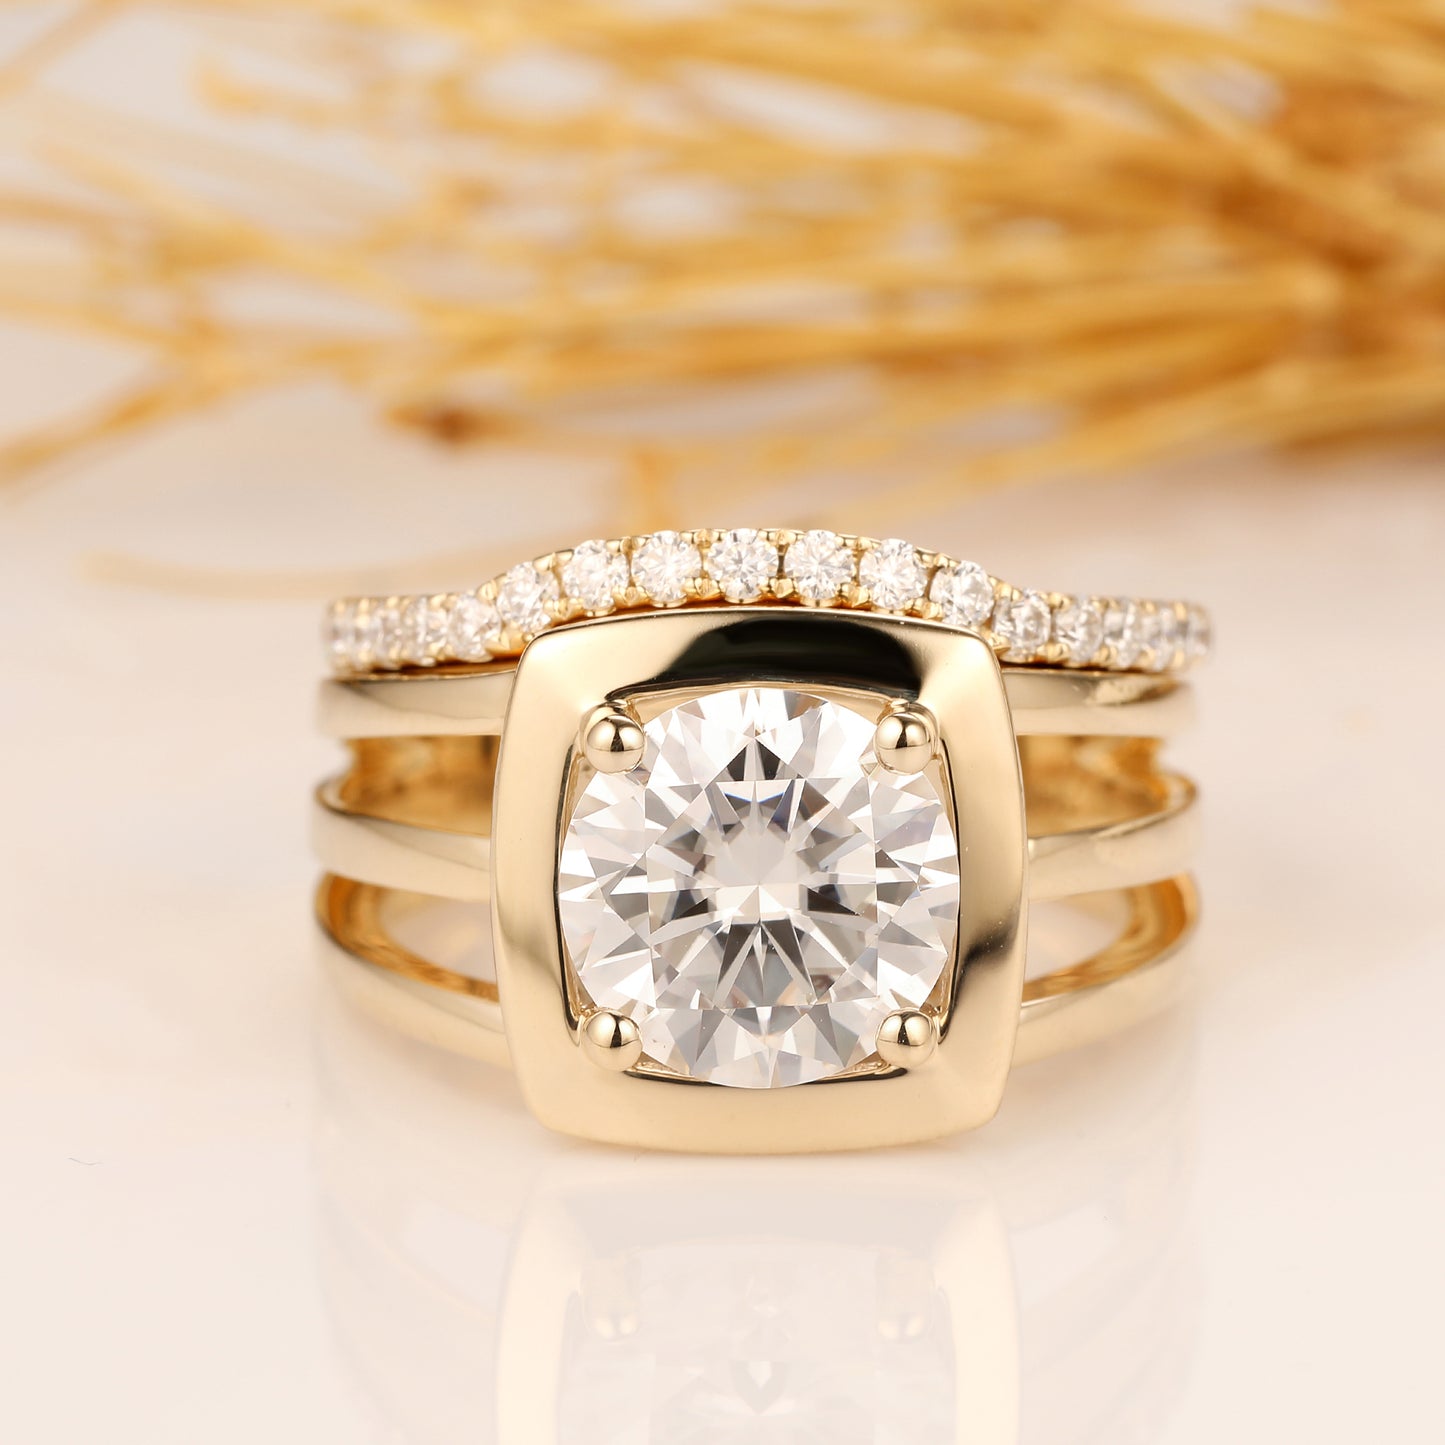 3CT Round Cut Moissanite Engagement Ring, 14k Solid Yellow Gold Bridal Set